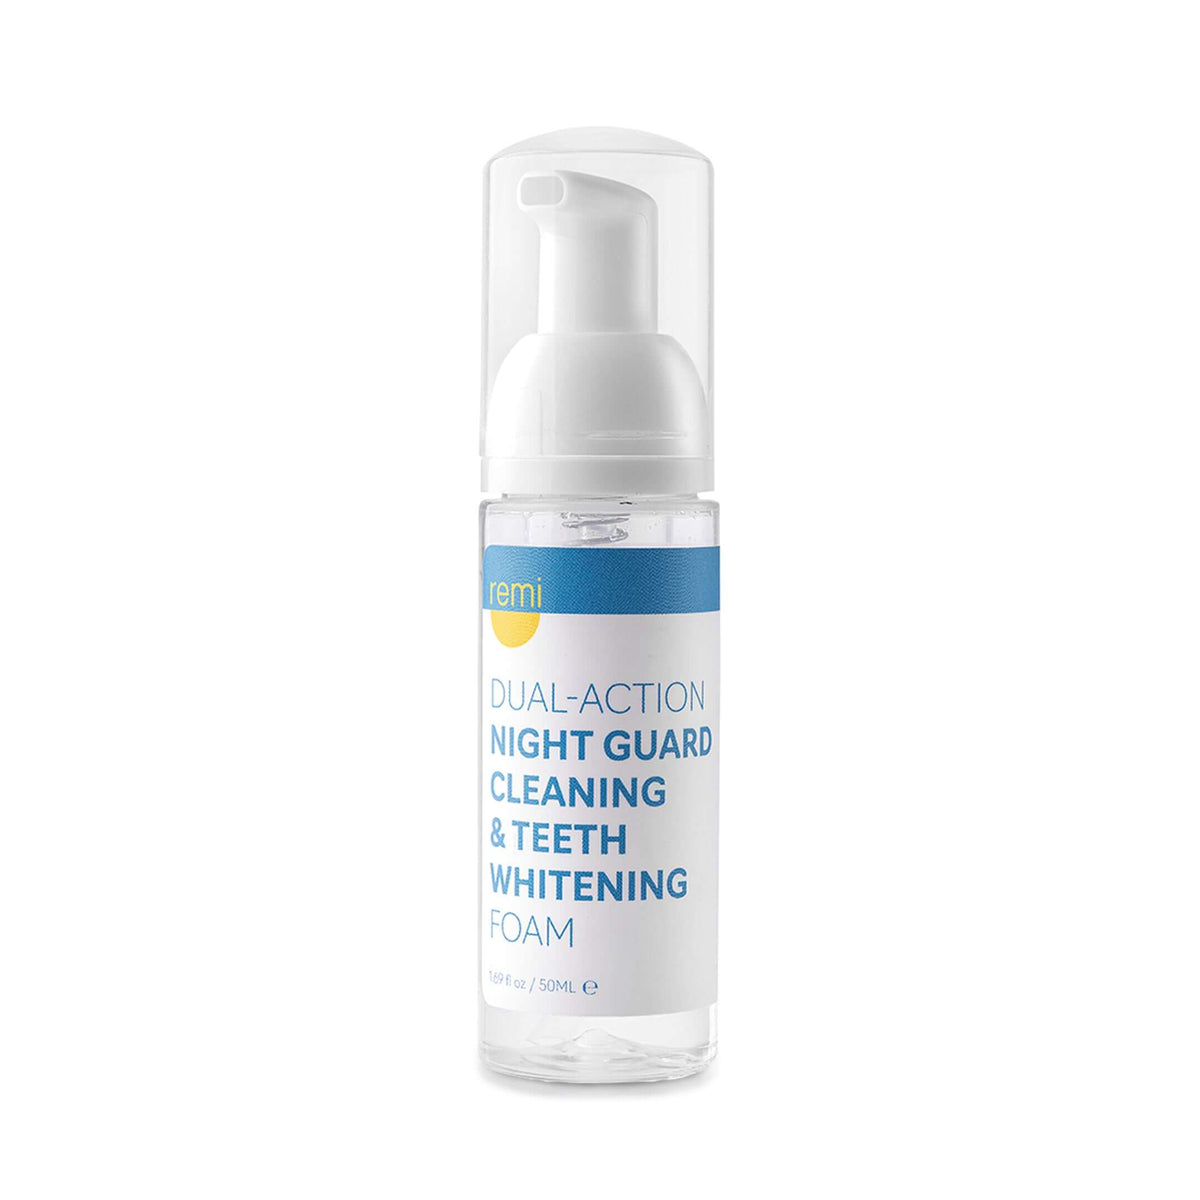 Dual Action Night Guard Cleaning and Teeth Whitening Foam